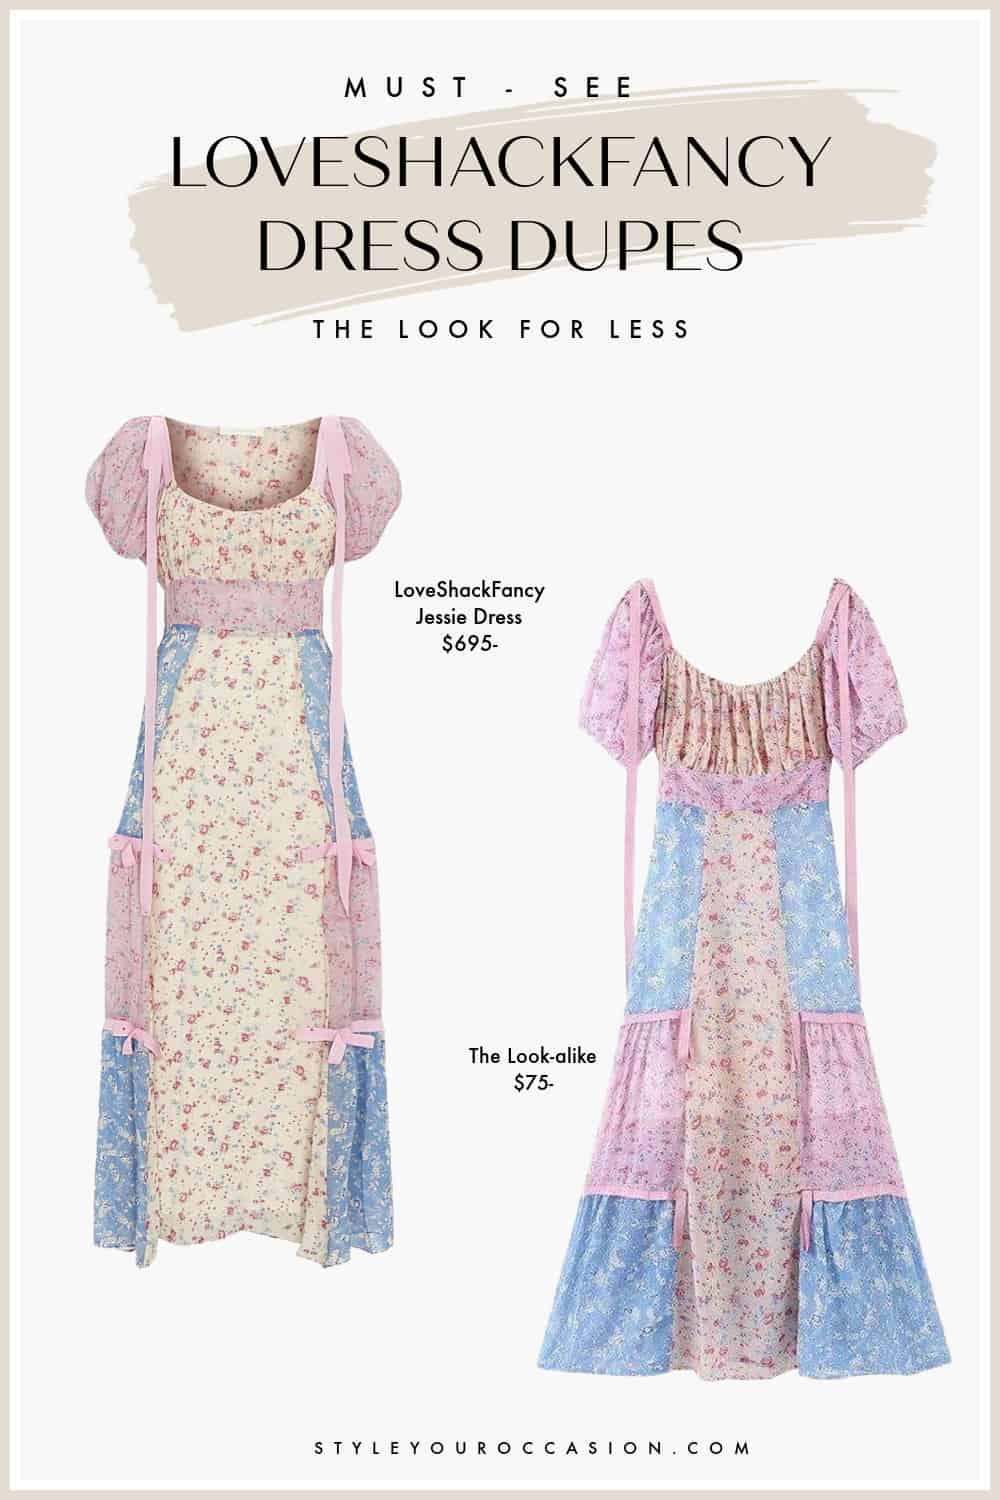 image comparing two pink floral patchwork midi dresses, one from LoveShackFancy, the other a dupe from Etsy